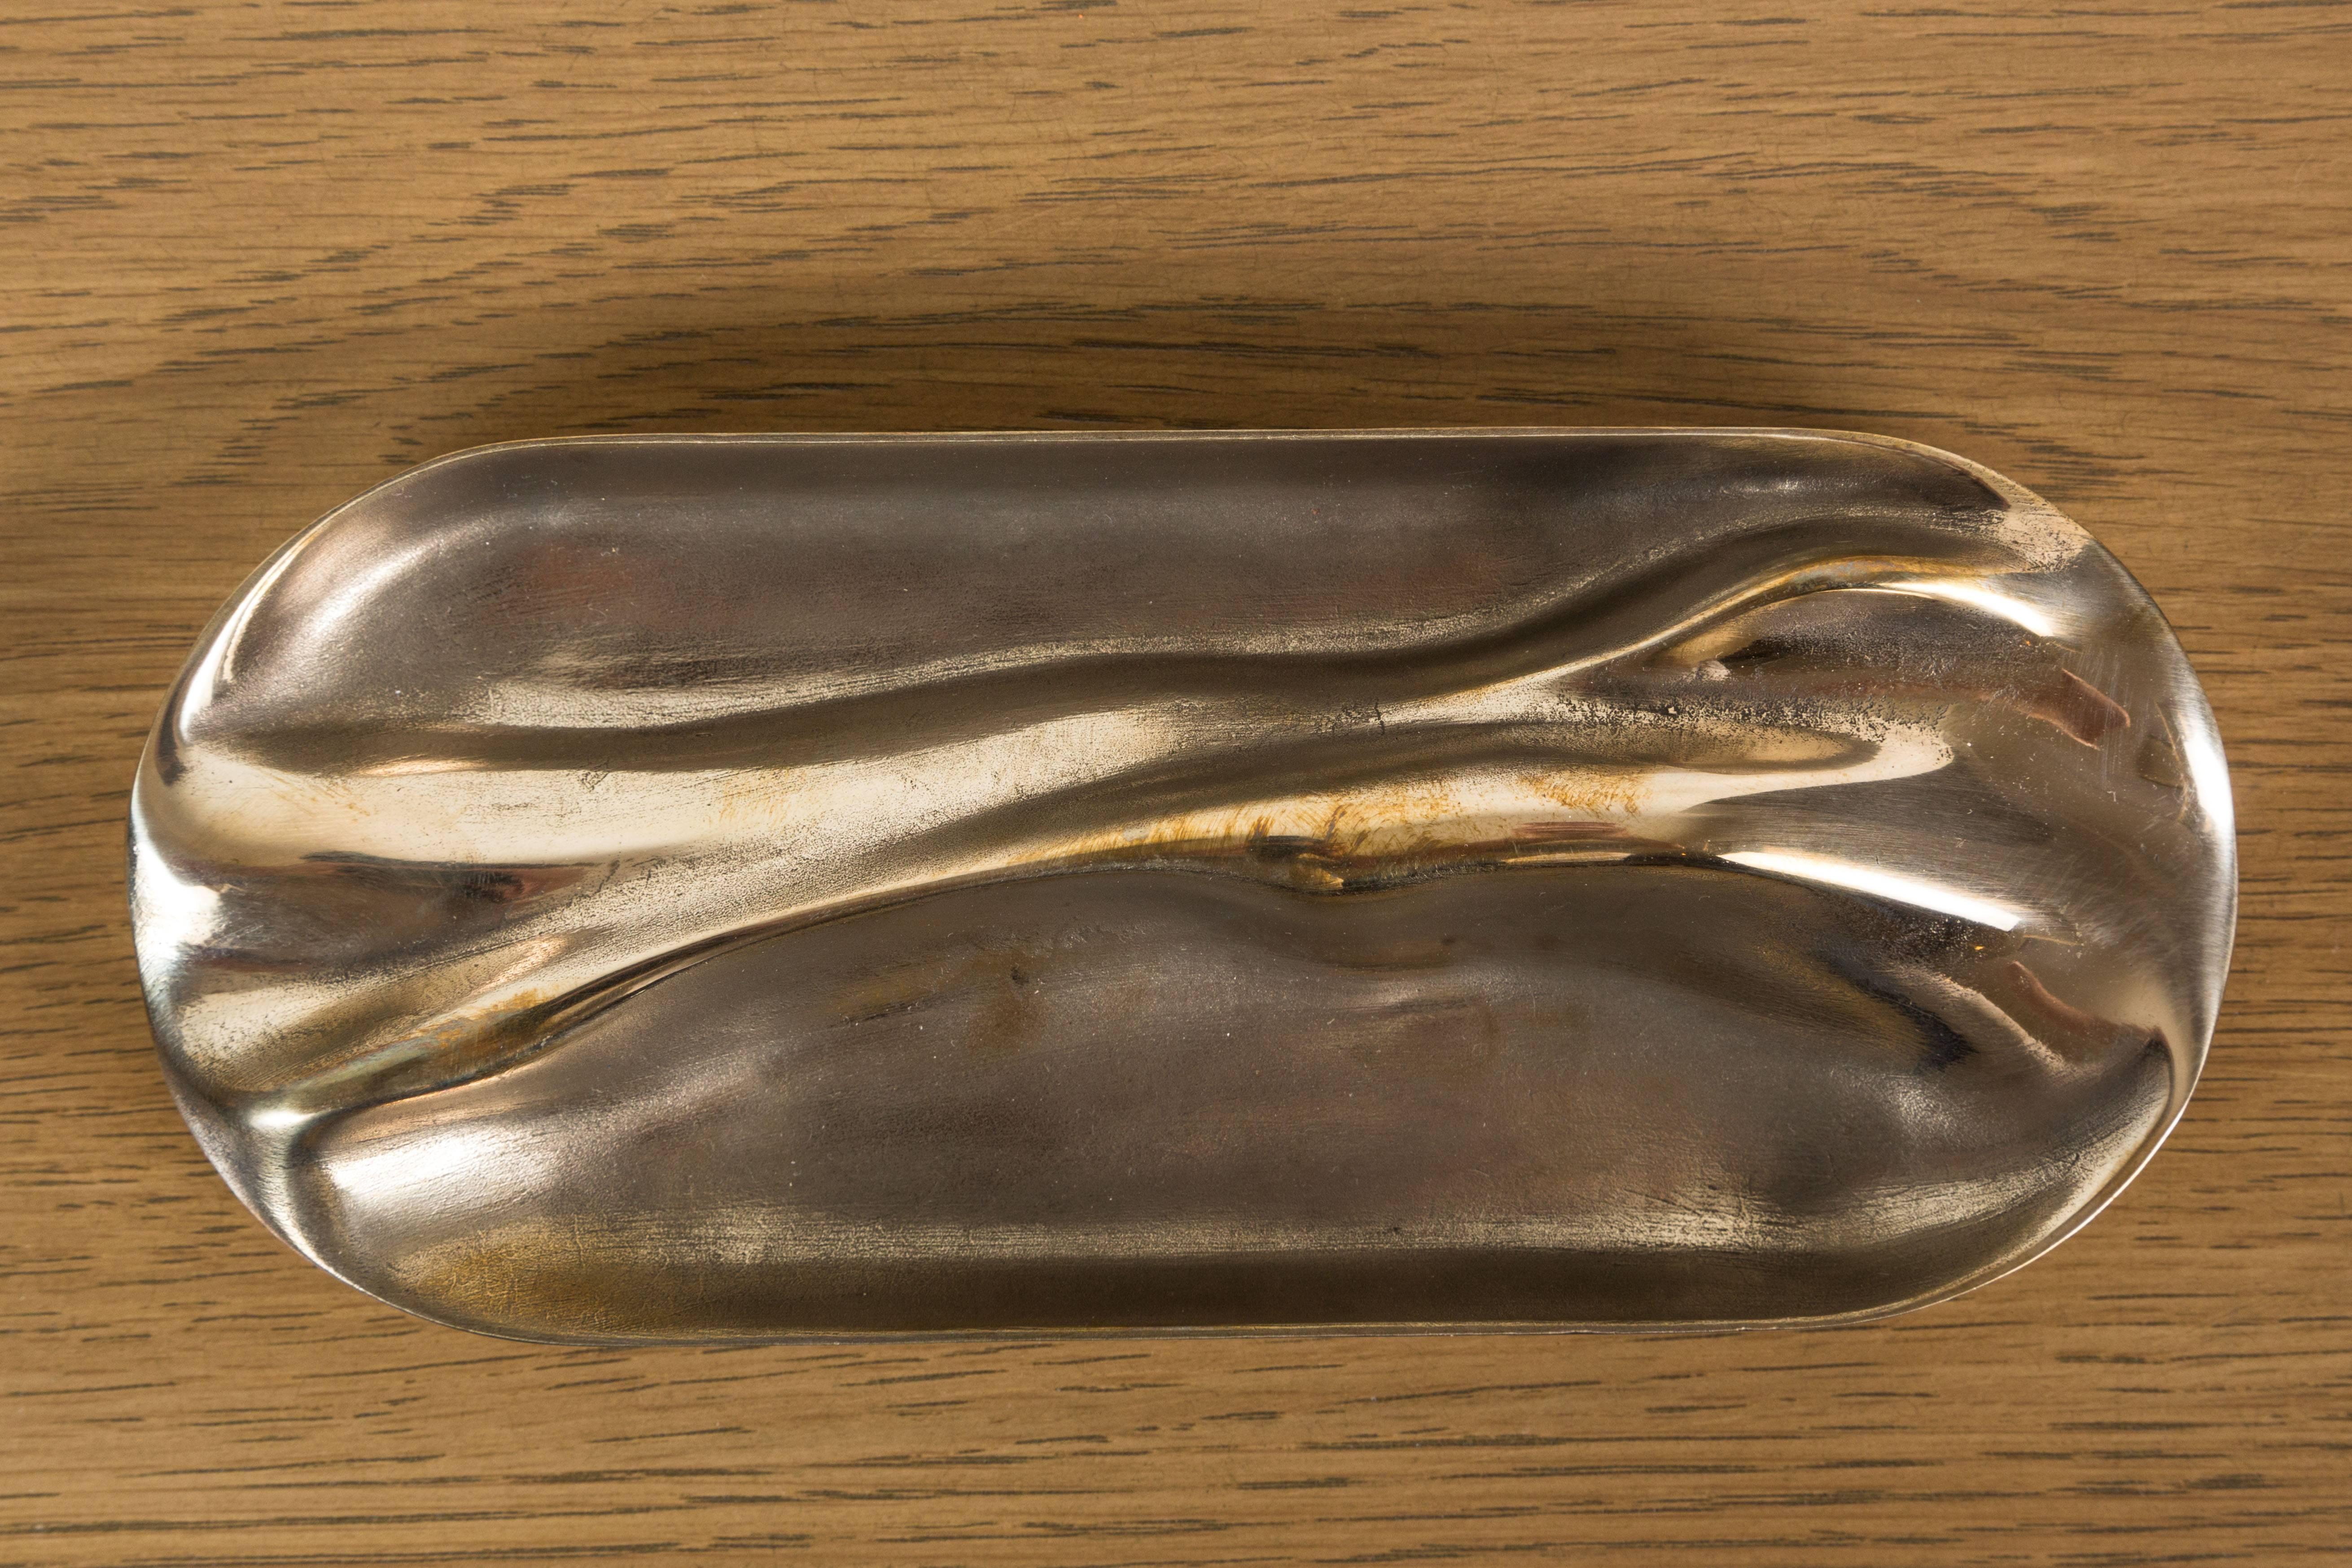 Contemporary Small Bronze Tray by Artist Vincent Pocsik for Lawson-Fenning